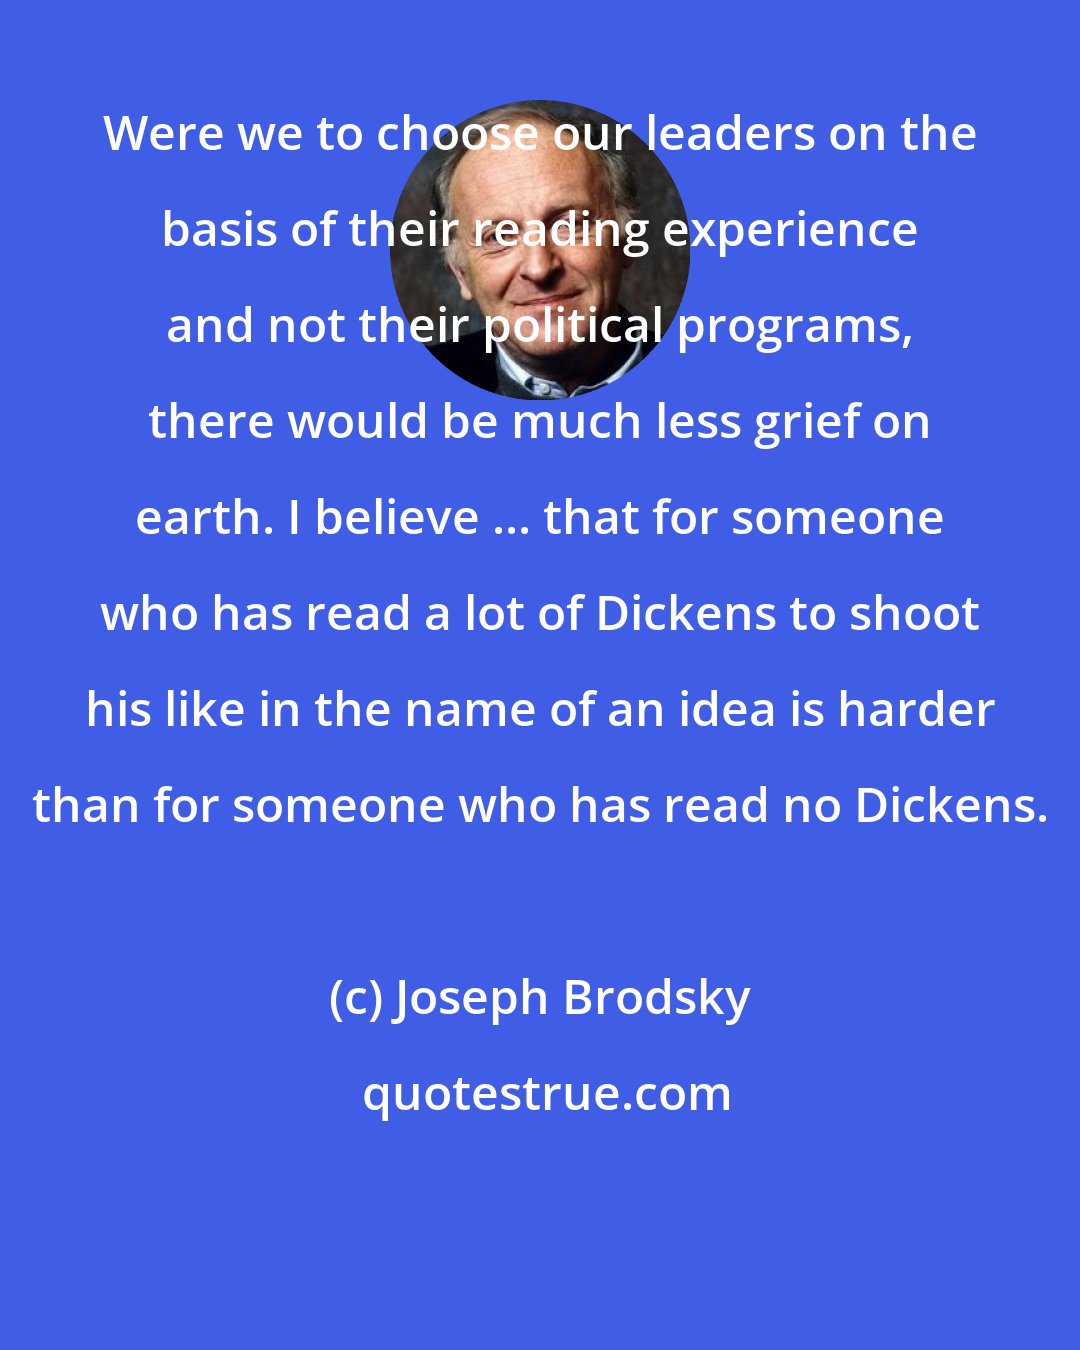 Joseph Brodsky: Were we to choose our leaders on the basis of their reading experience and not their political programs, there would be much less grief on earth. I believe ... that for someone who has read a lot of Dickens to shoot his like in the name of an idea is harder than for someone who has read no Dickens.